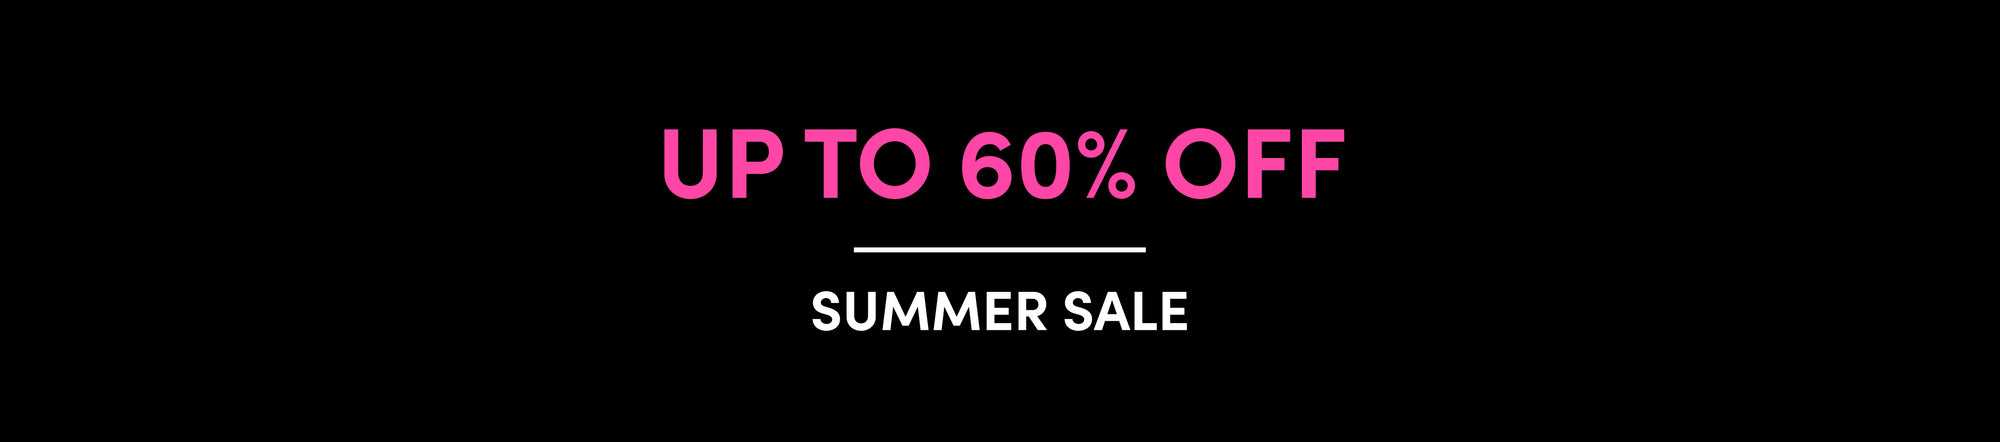 Up to 60% off Summer Sale